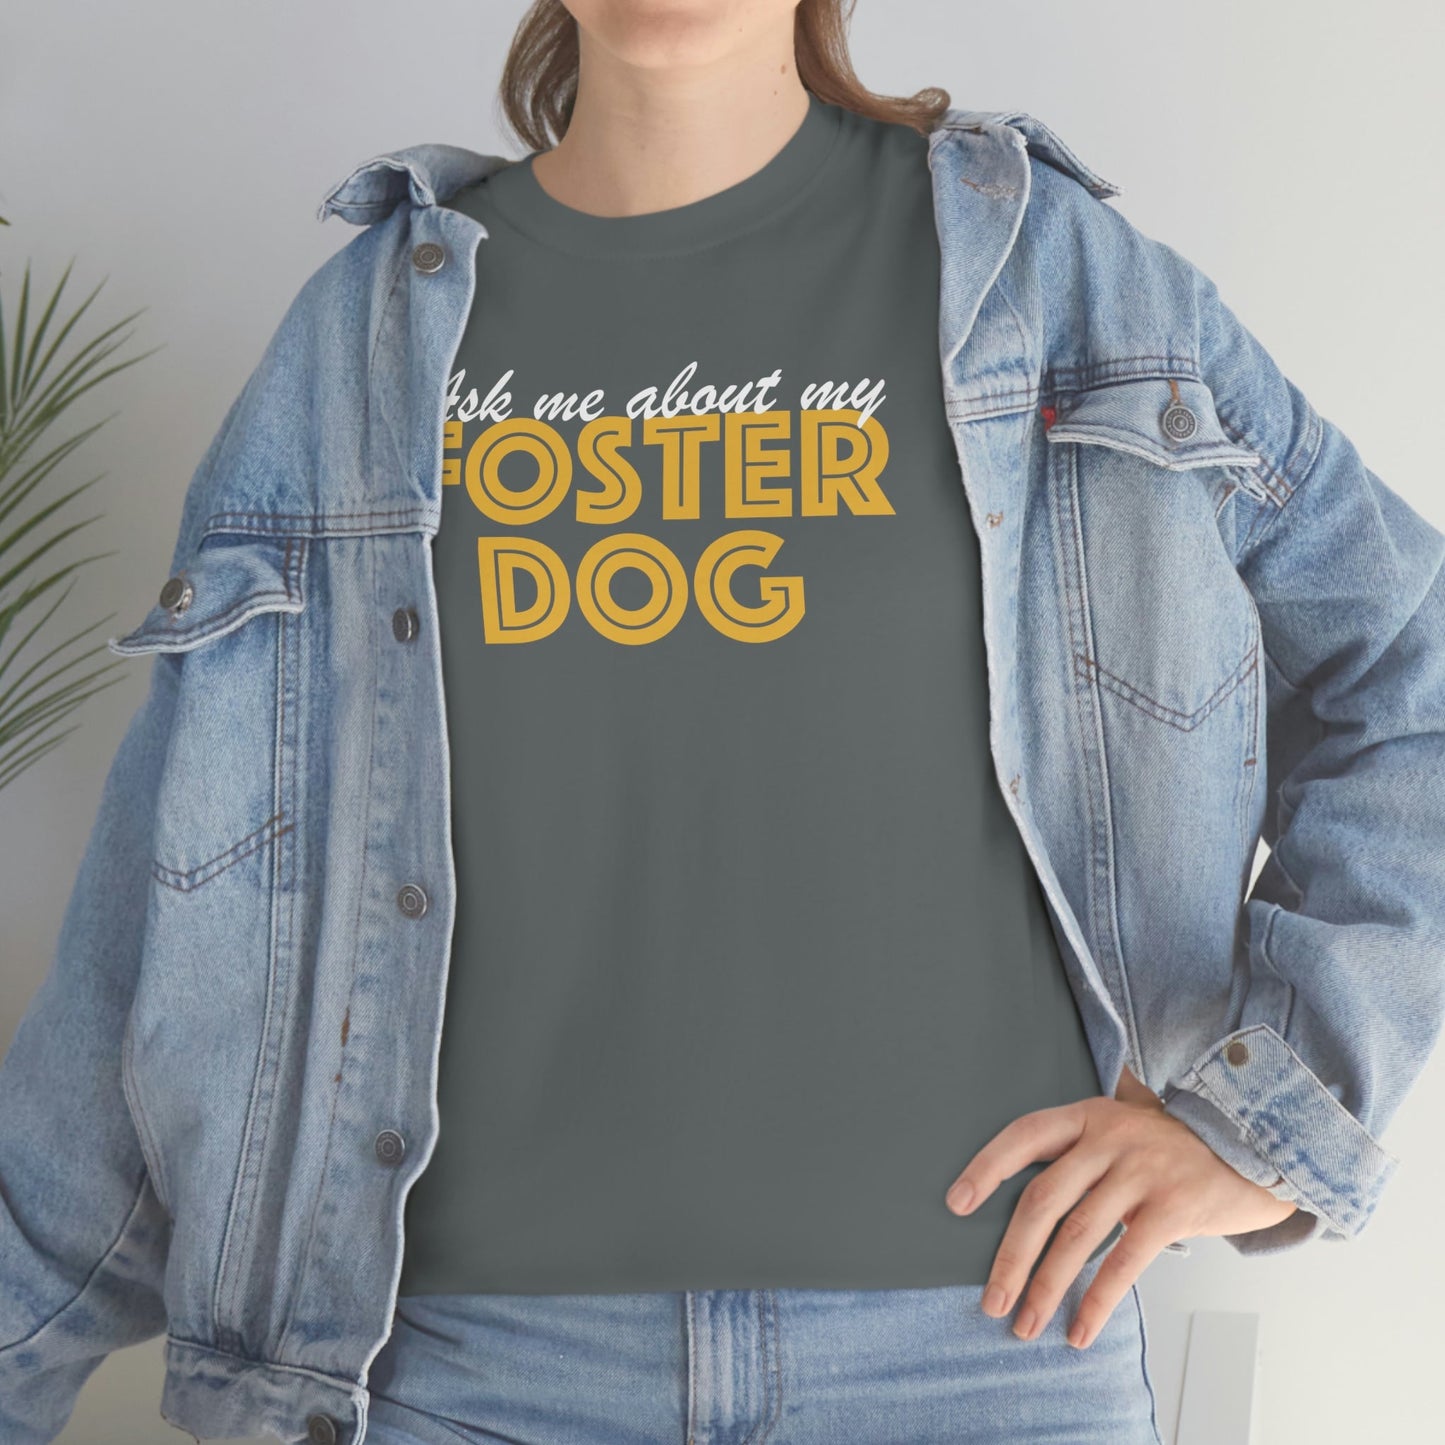 Ask Me About My Foster Dog | Text Tees - Detezi Designs-25803454684281576282